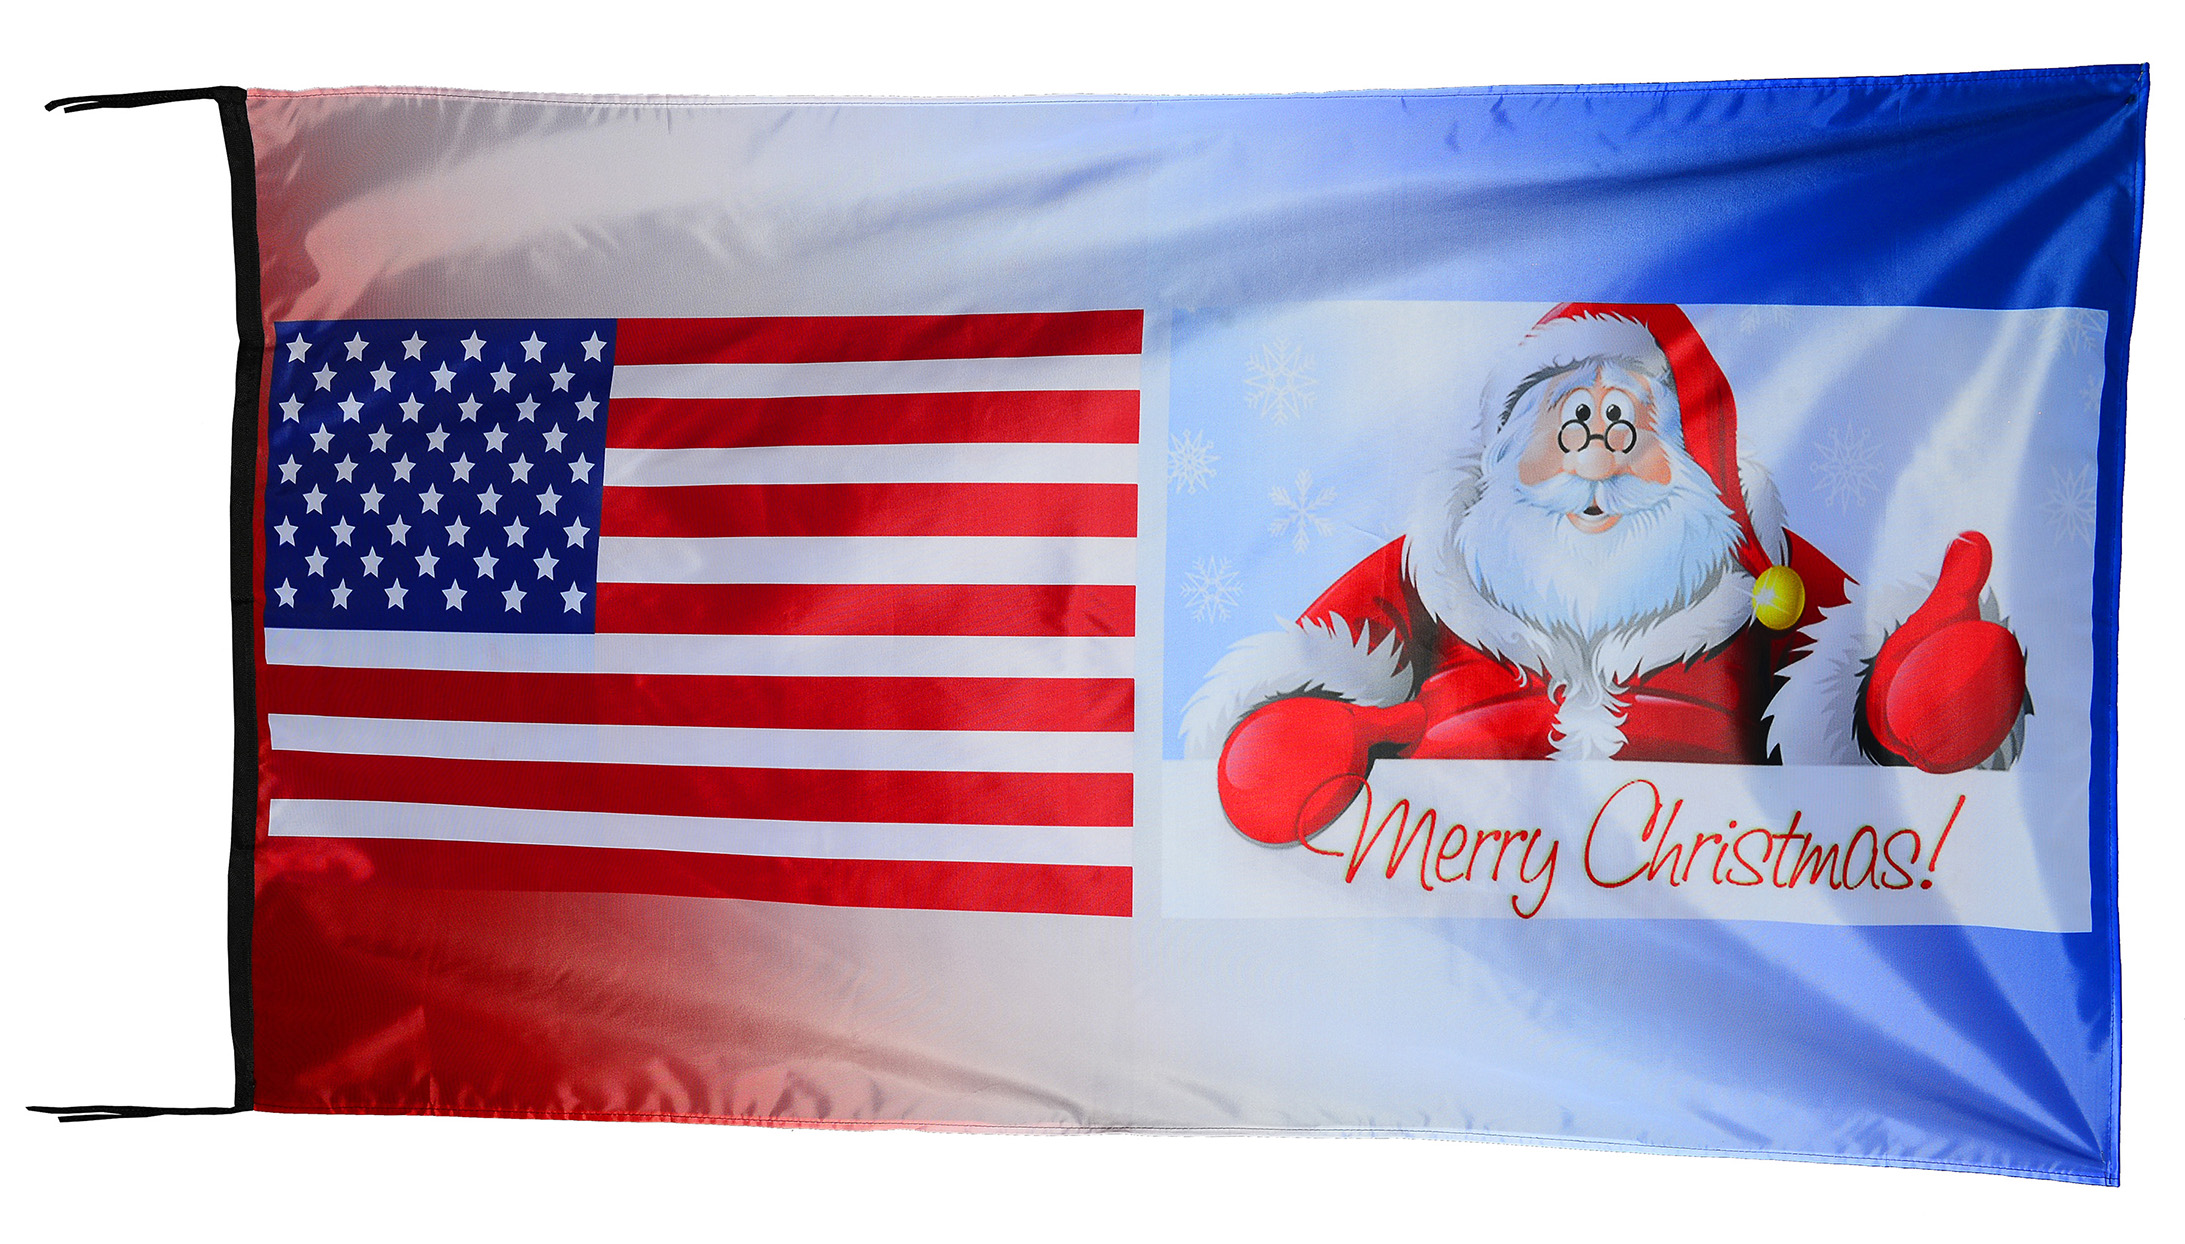 Flag  038 USA / US Country / United States Of America and Happy Xmas Merry Xmas / Christmas / Hollidays / Santa / Winter / Snow / Patriotic / Pride Hybrid Weather-Resistant Polyester Outdoor Flag Landscape Banner / Vivid Colors / 3 X 5 FT (150 x 90cm) International Flags for Sale